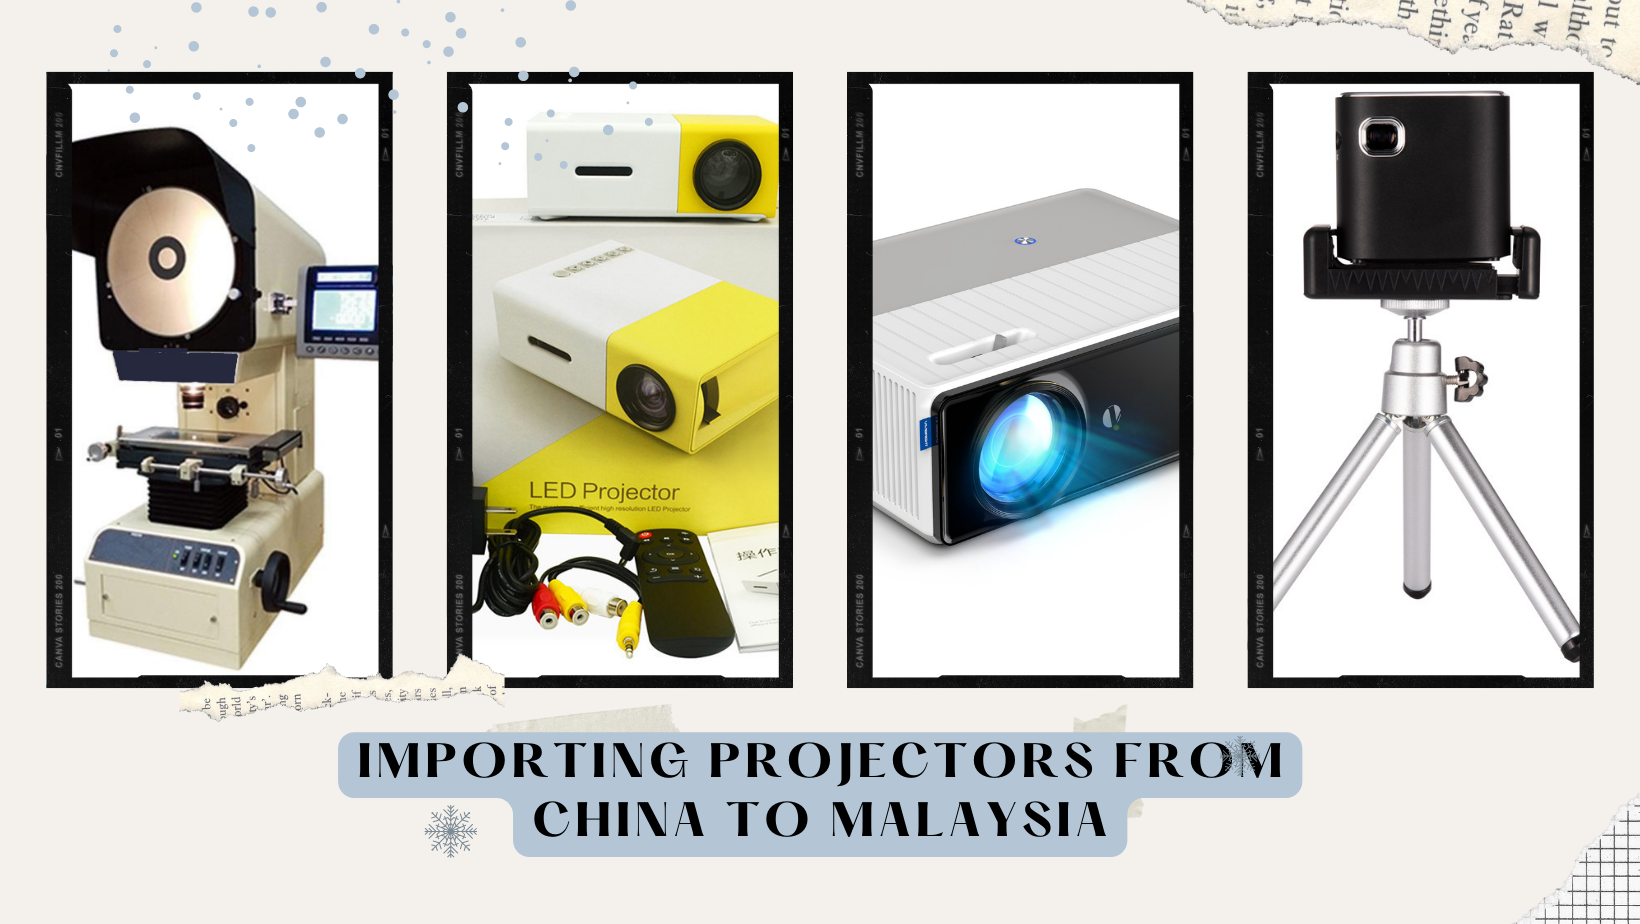 Importing Projectors from China to Malaysia